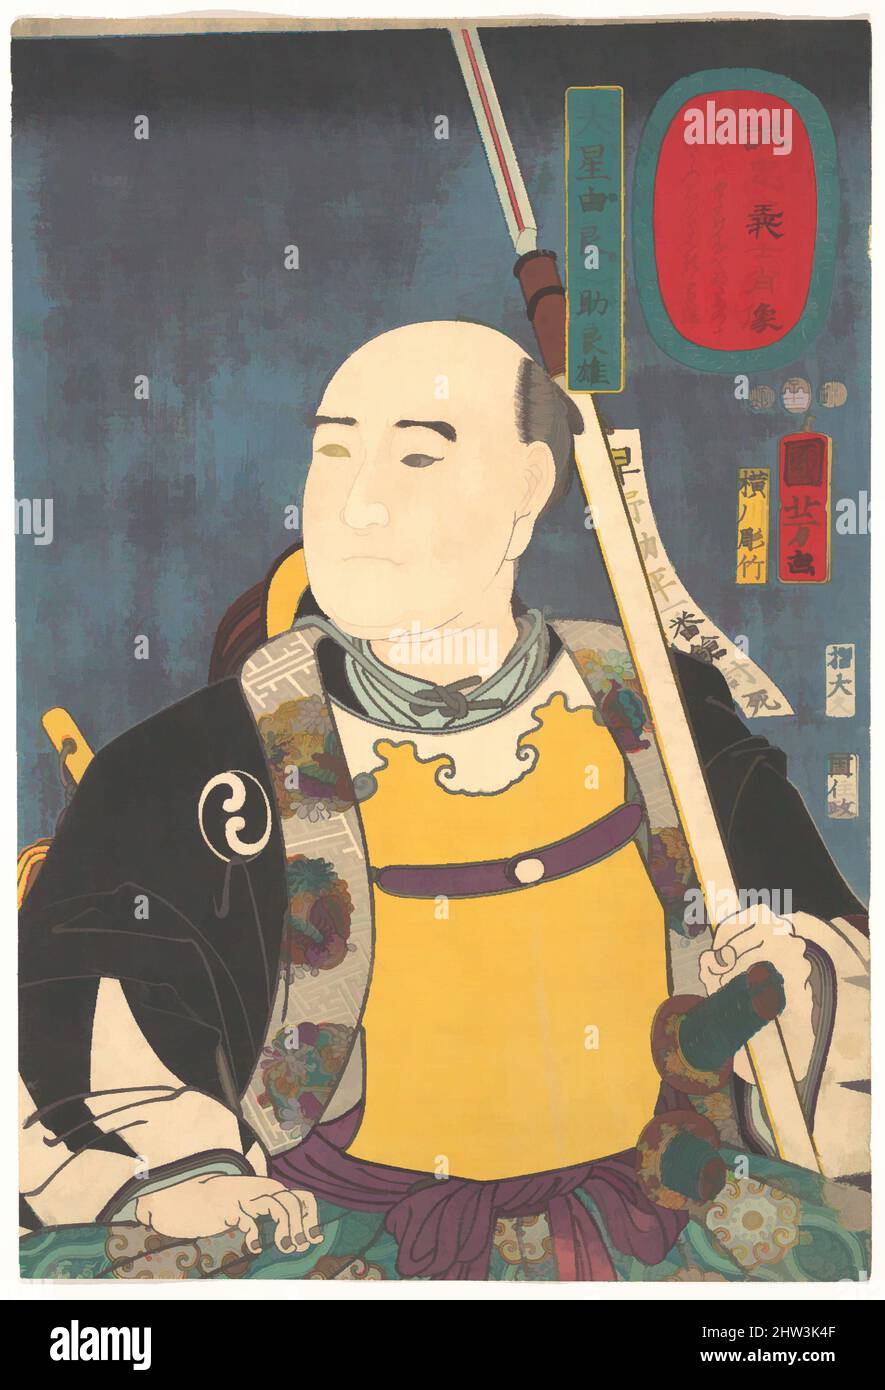 Art inspired by Portrait of Oboshi Yuranosuke Yoshio (The Leader), Edo period (1615–1868), 1852, Japan, Polychrome woodblock print; ink and color on paper, H. 14 5/8 in. (37.1 cm); W. 9 7/8 in. (25.1 cm), Prints, Utagawa Kuniyoshi (Japanese, 1797–1861), The samurai in this print wears, Classic works modernized by Artotop with a splash of modernity. Shapes, color and value, eye-catching visual impact on art. Emotions through freedom of artworks in a contemporary way. A timeless message pursuing a wildly creative new direction. Artists turning to the digital medium and creating the Artotop NFT Stock Photo